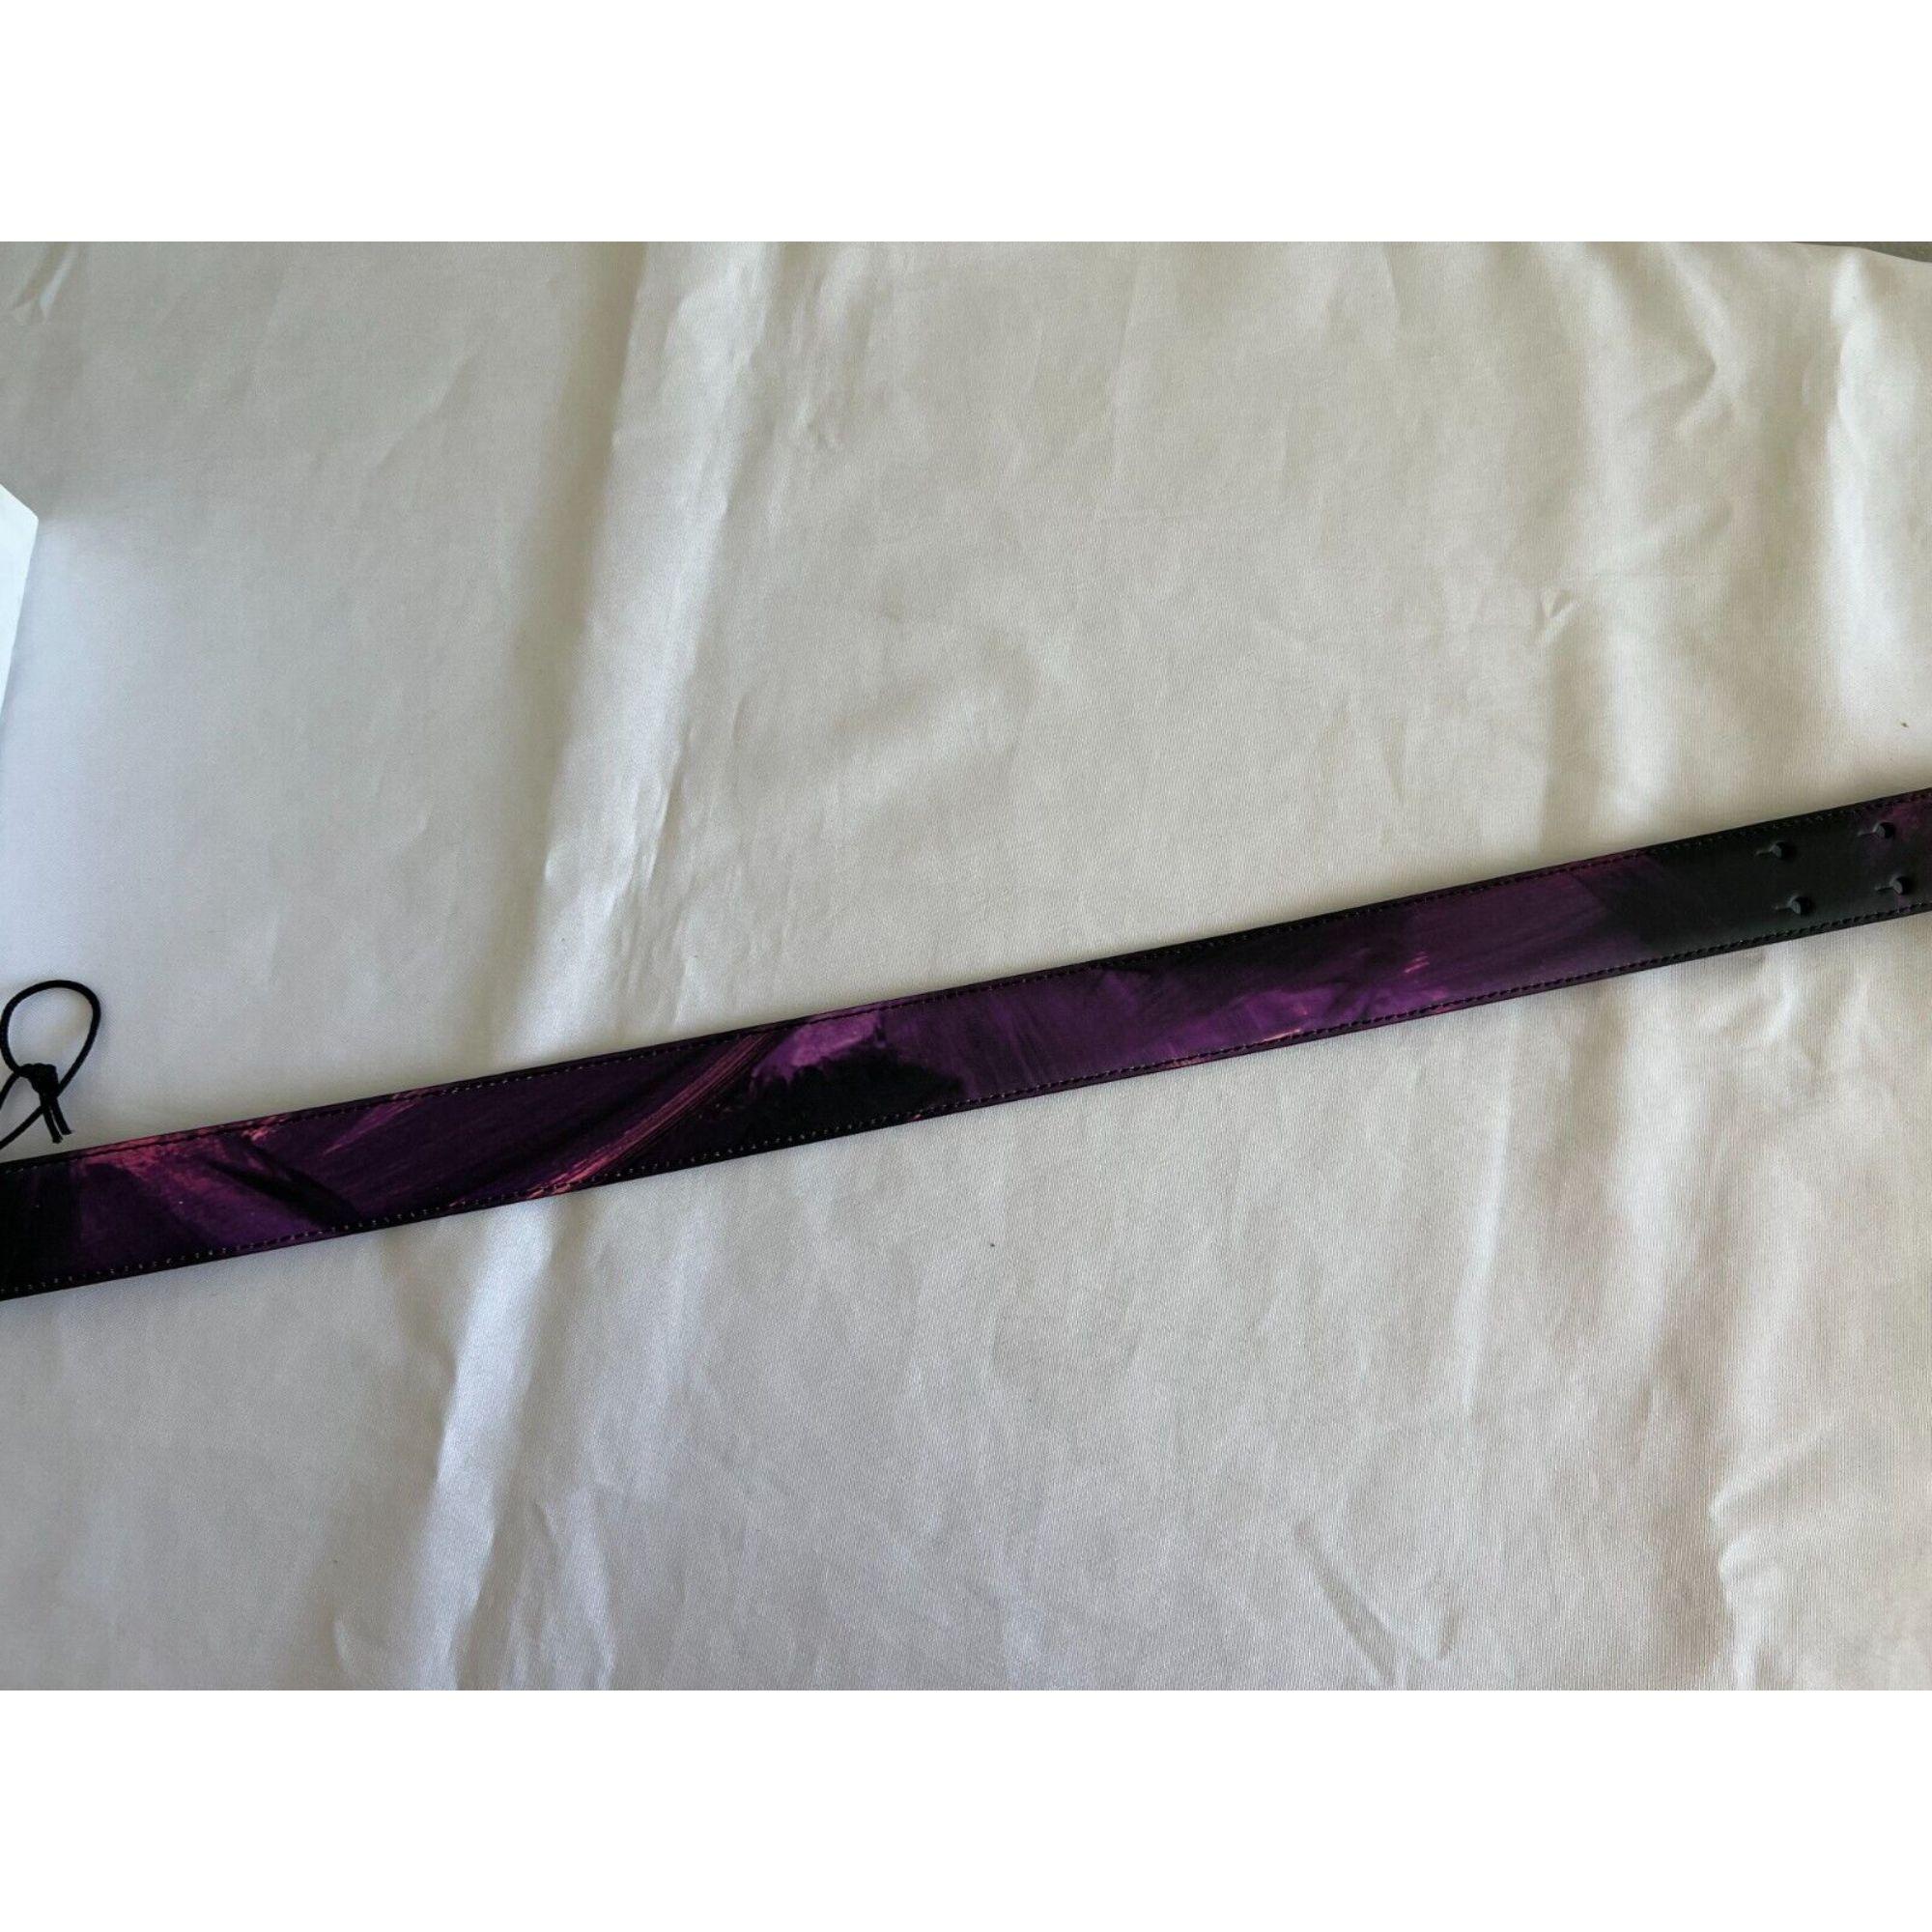 SS22 Moschino Couture Brushstroke Purple Black Leather Logo Belt by Jeremy Scott In New Condition For Sale In Matthews, NC